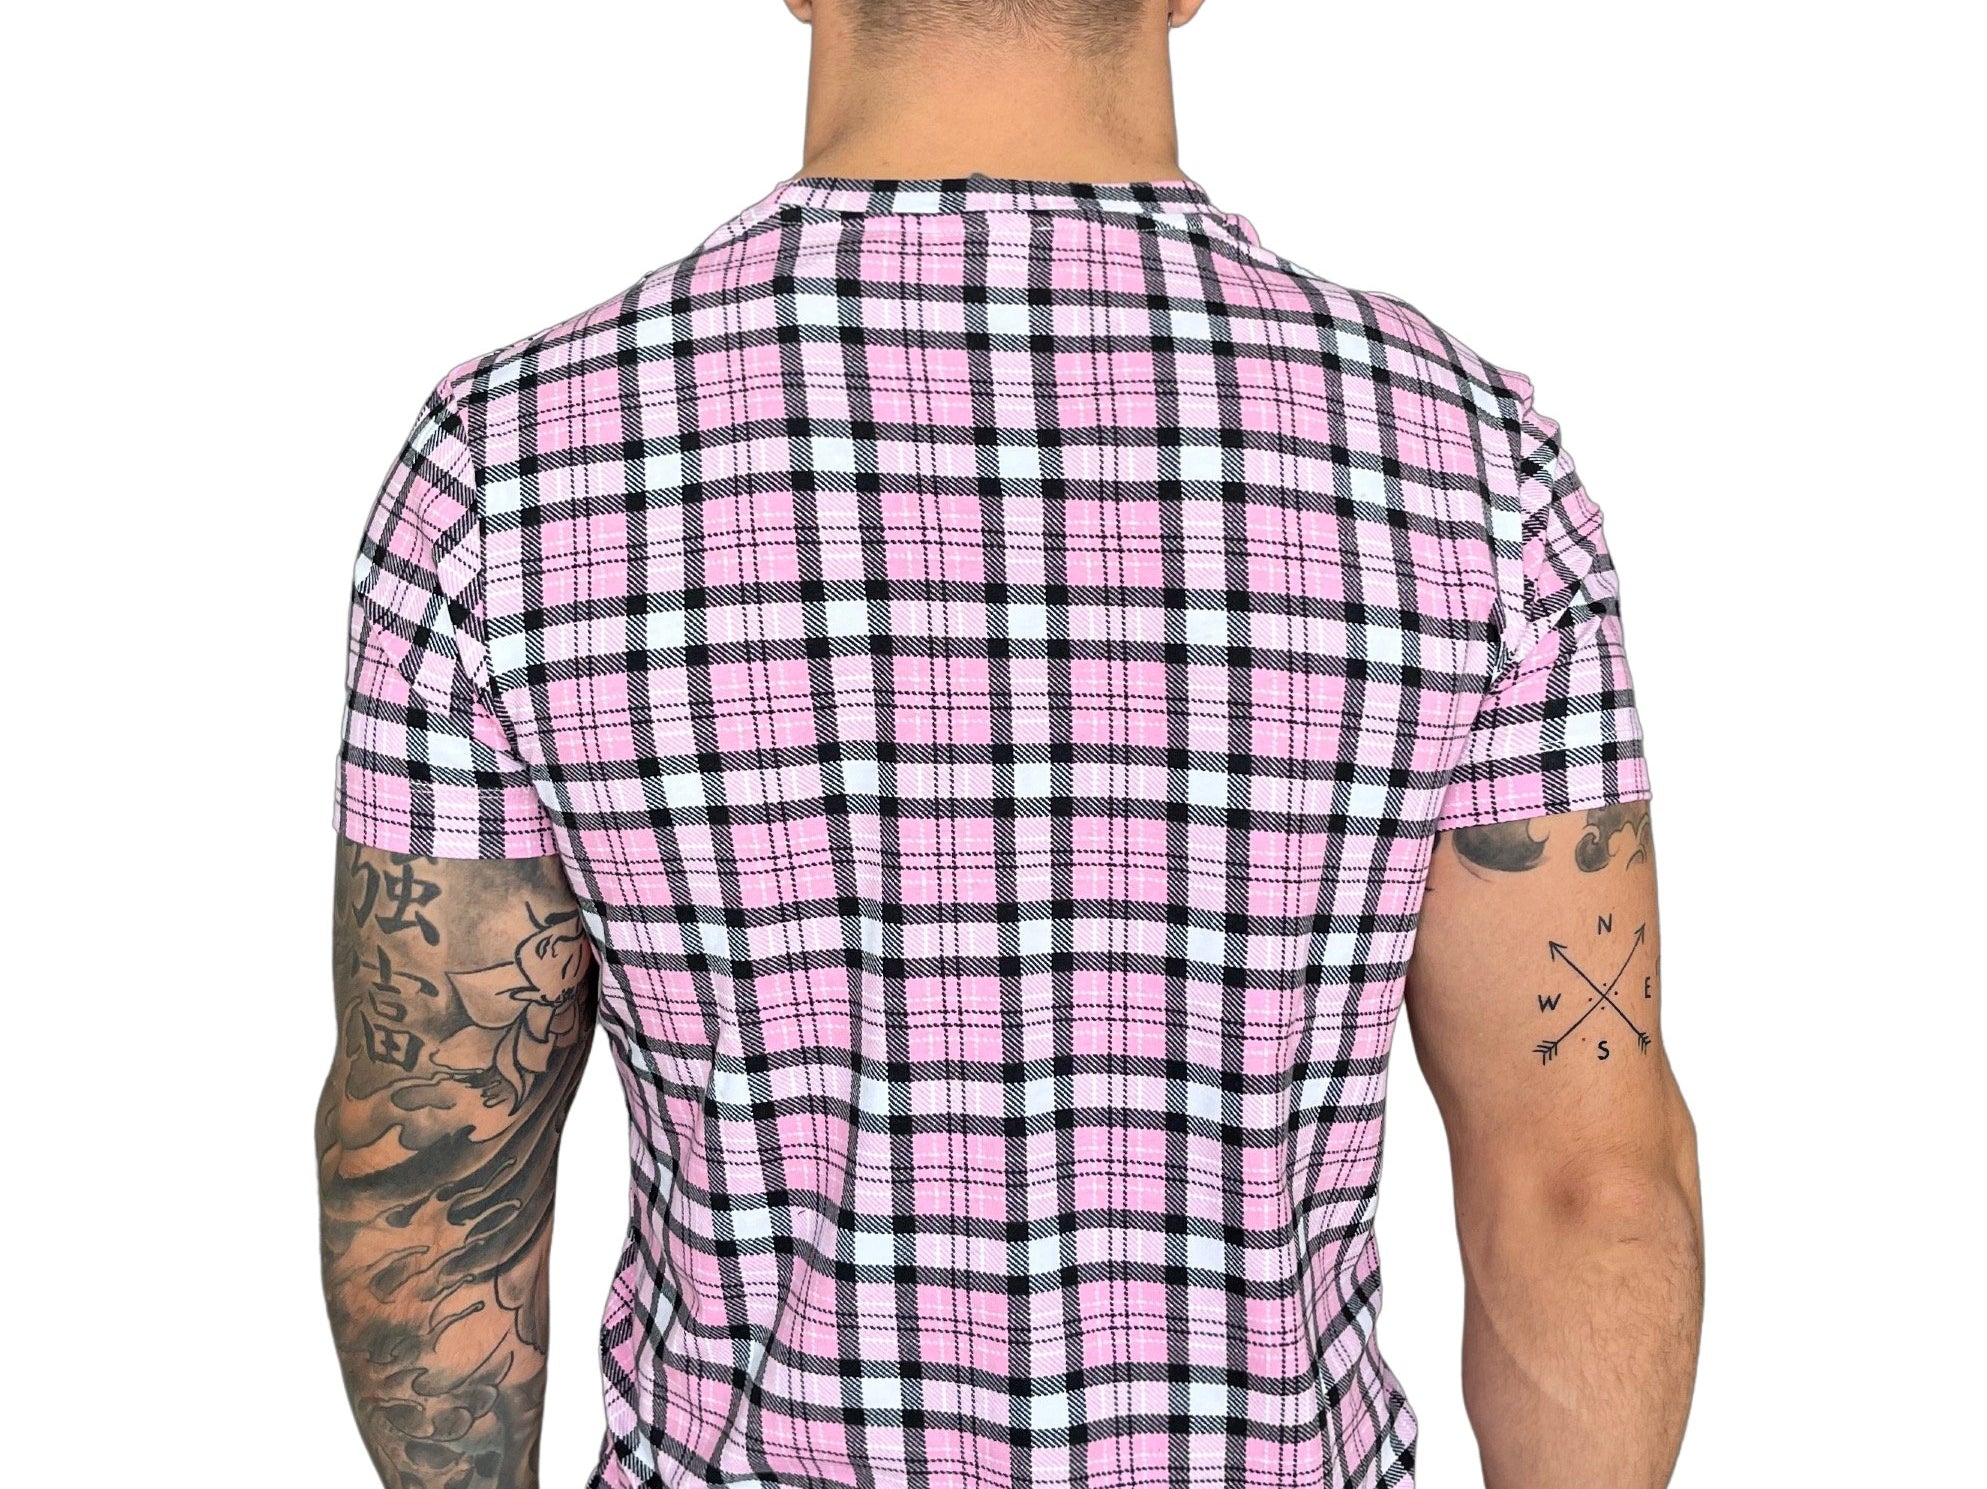 RUBIKS CUBE - Pink T-shirt for Men (PRE-ORDER DISPATCH DATE 30 NOVEMBER 2022) - Sarman Fashion - Wholesale Clothing Fashion Brand for Men from Canada